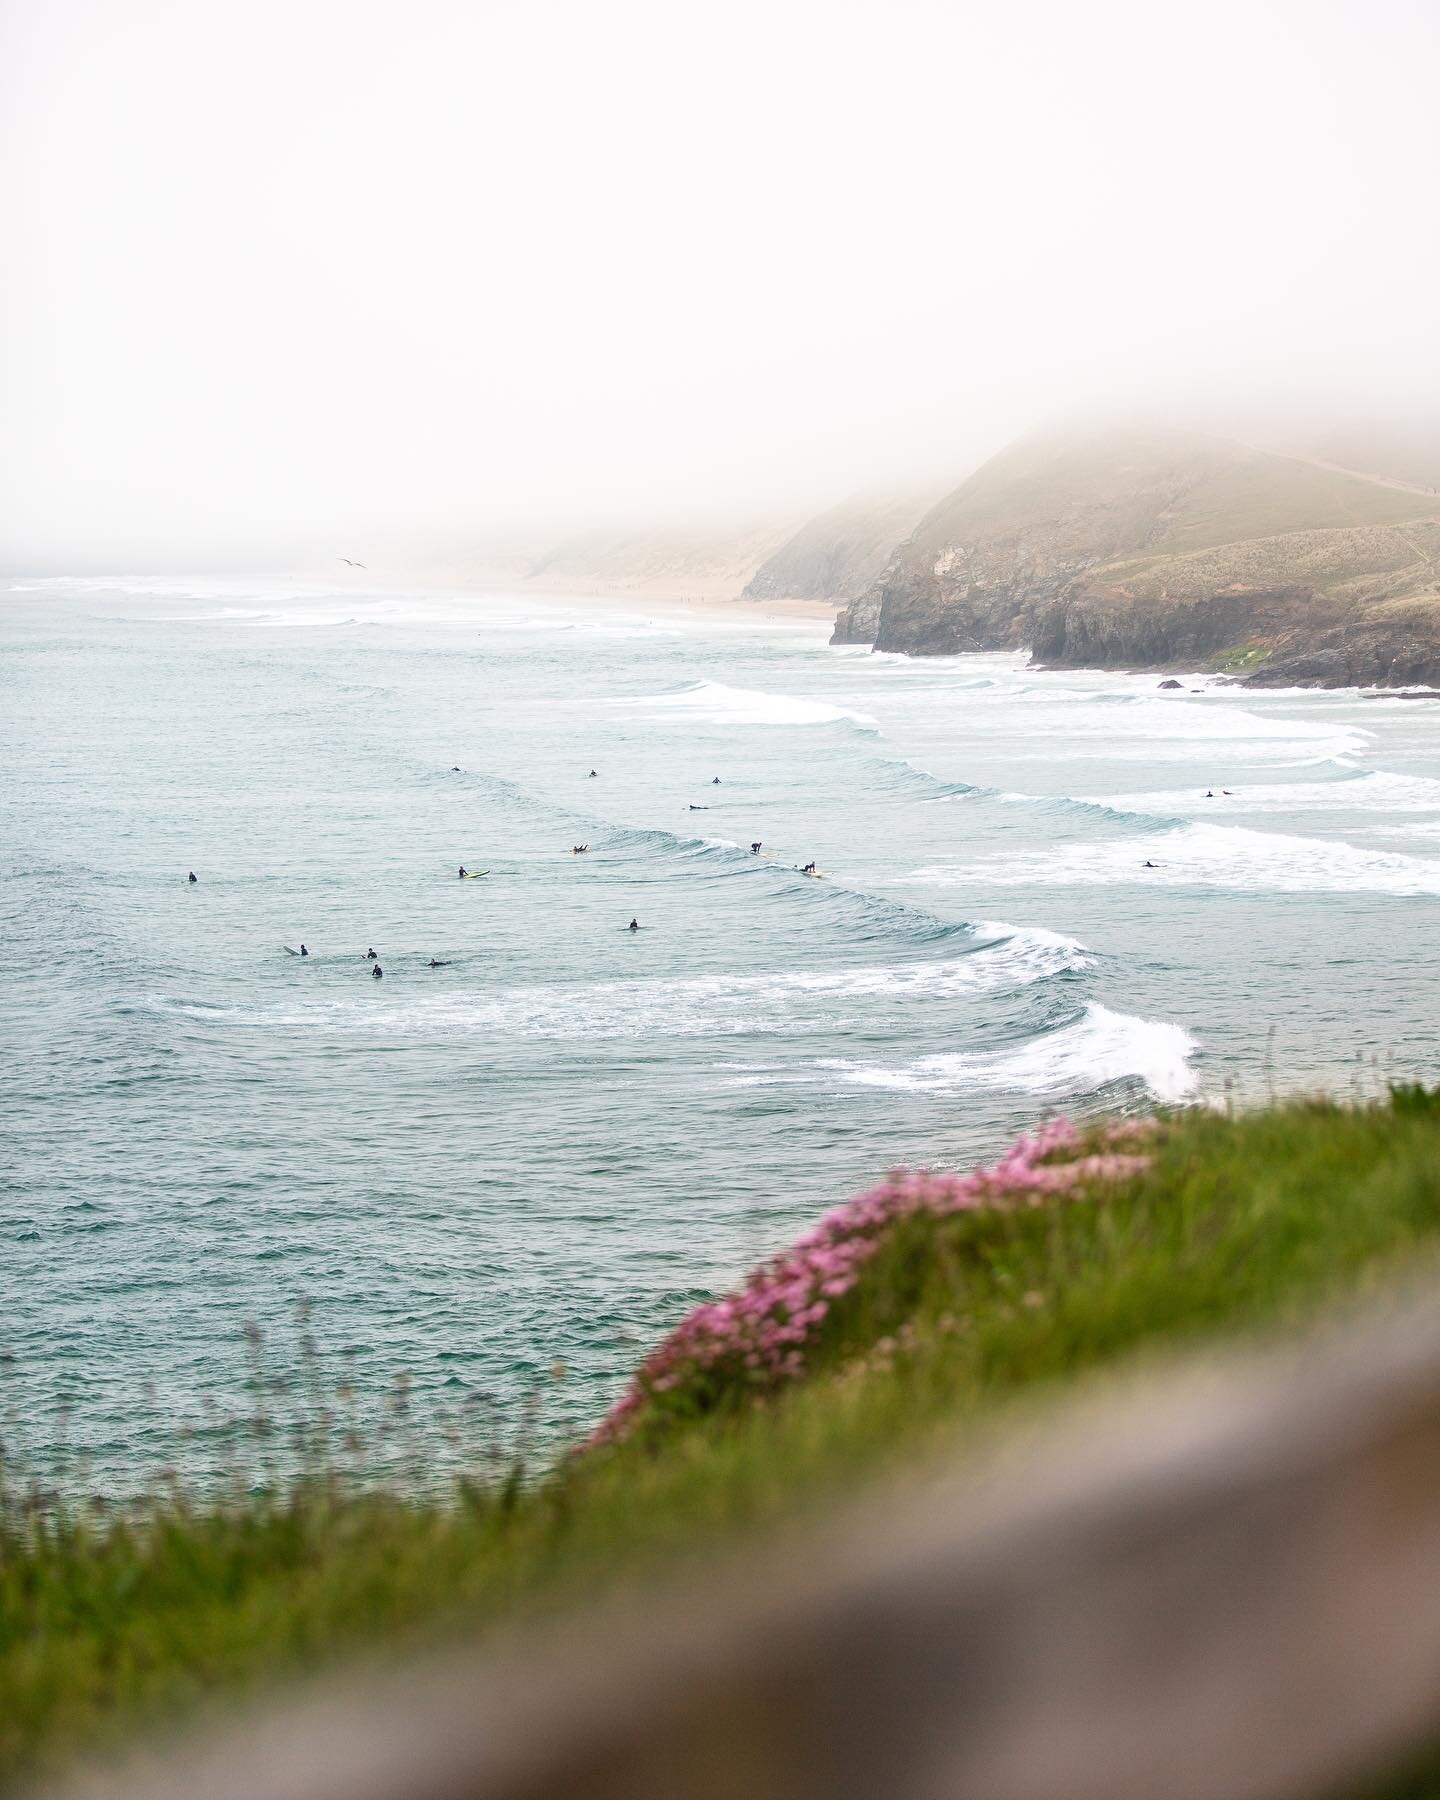 Some more misty goodness from the other week, with a welcome appearance from some sea thrift giving me all the summer vibes 🌊📸

#cornwallsurf #surfinspired #surfuk #ukshooters #surfeveryday #surfingmagazine #surf_shots #magicseaweed #waterphotograp